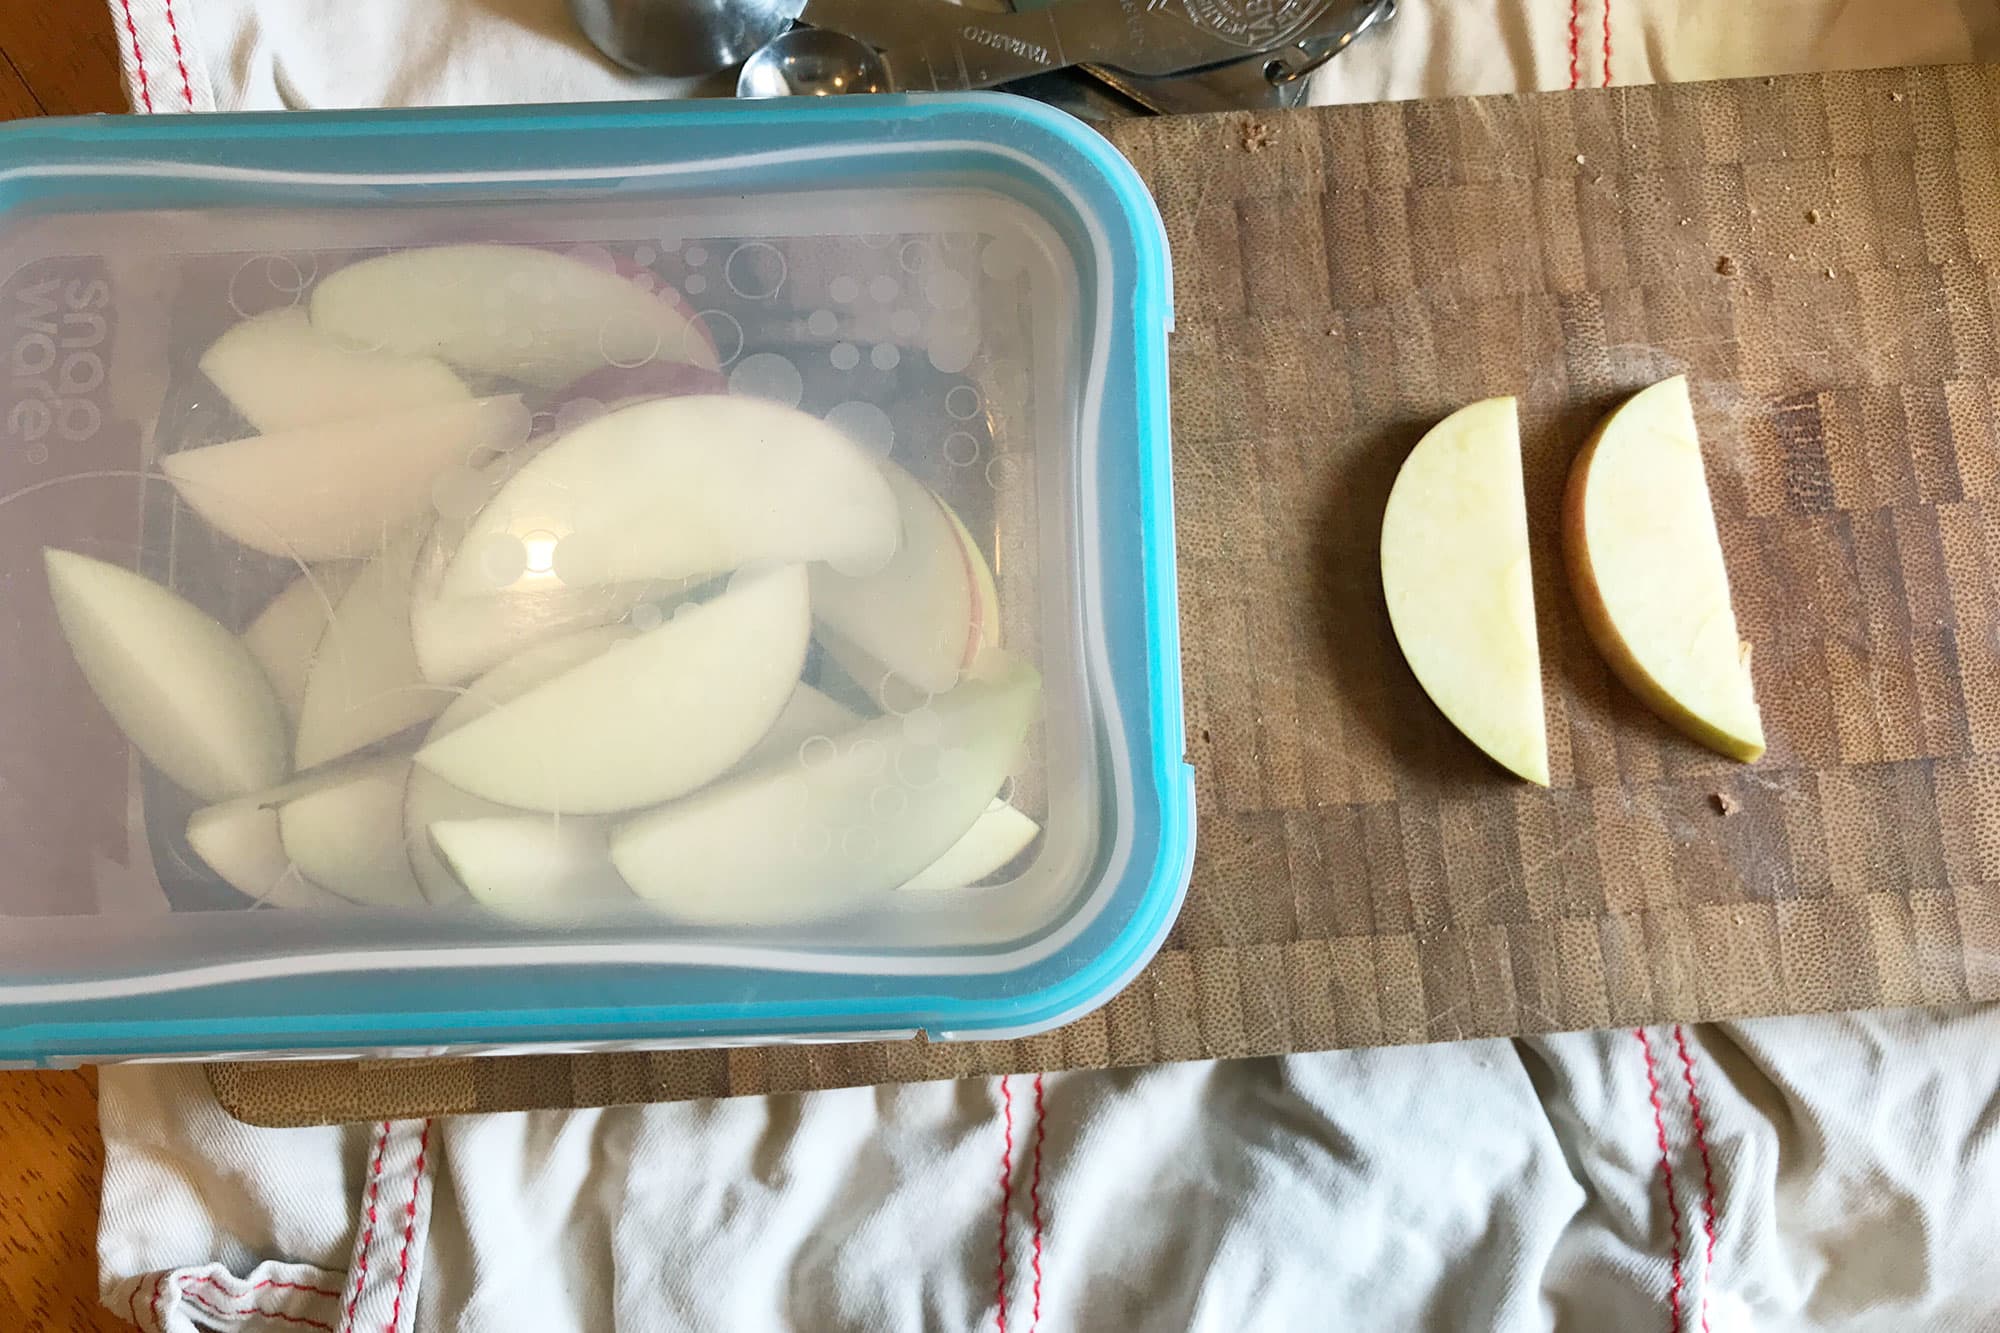 Easy Healthy Snack Sliced Apples (no browning!) - Courtney's Sweets